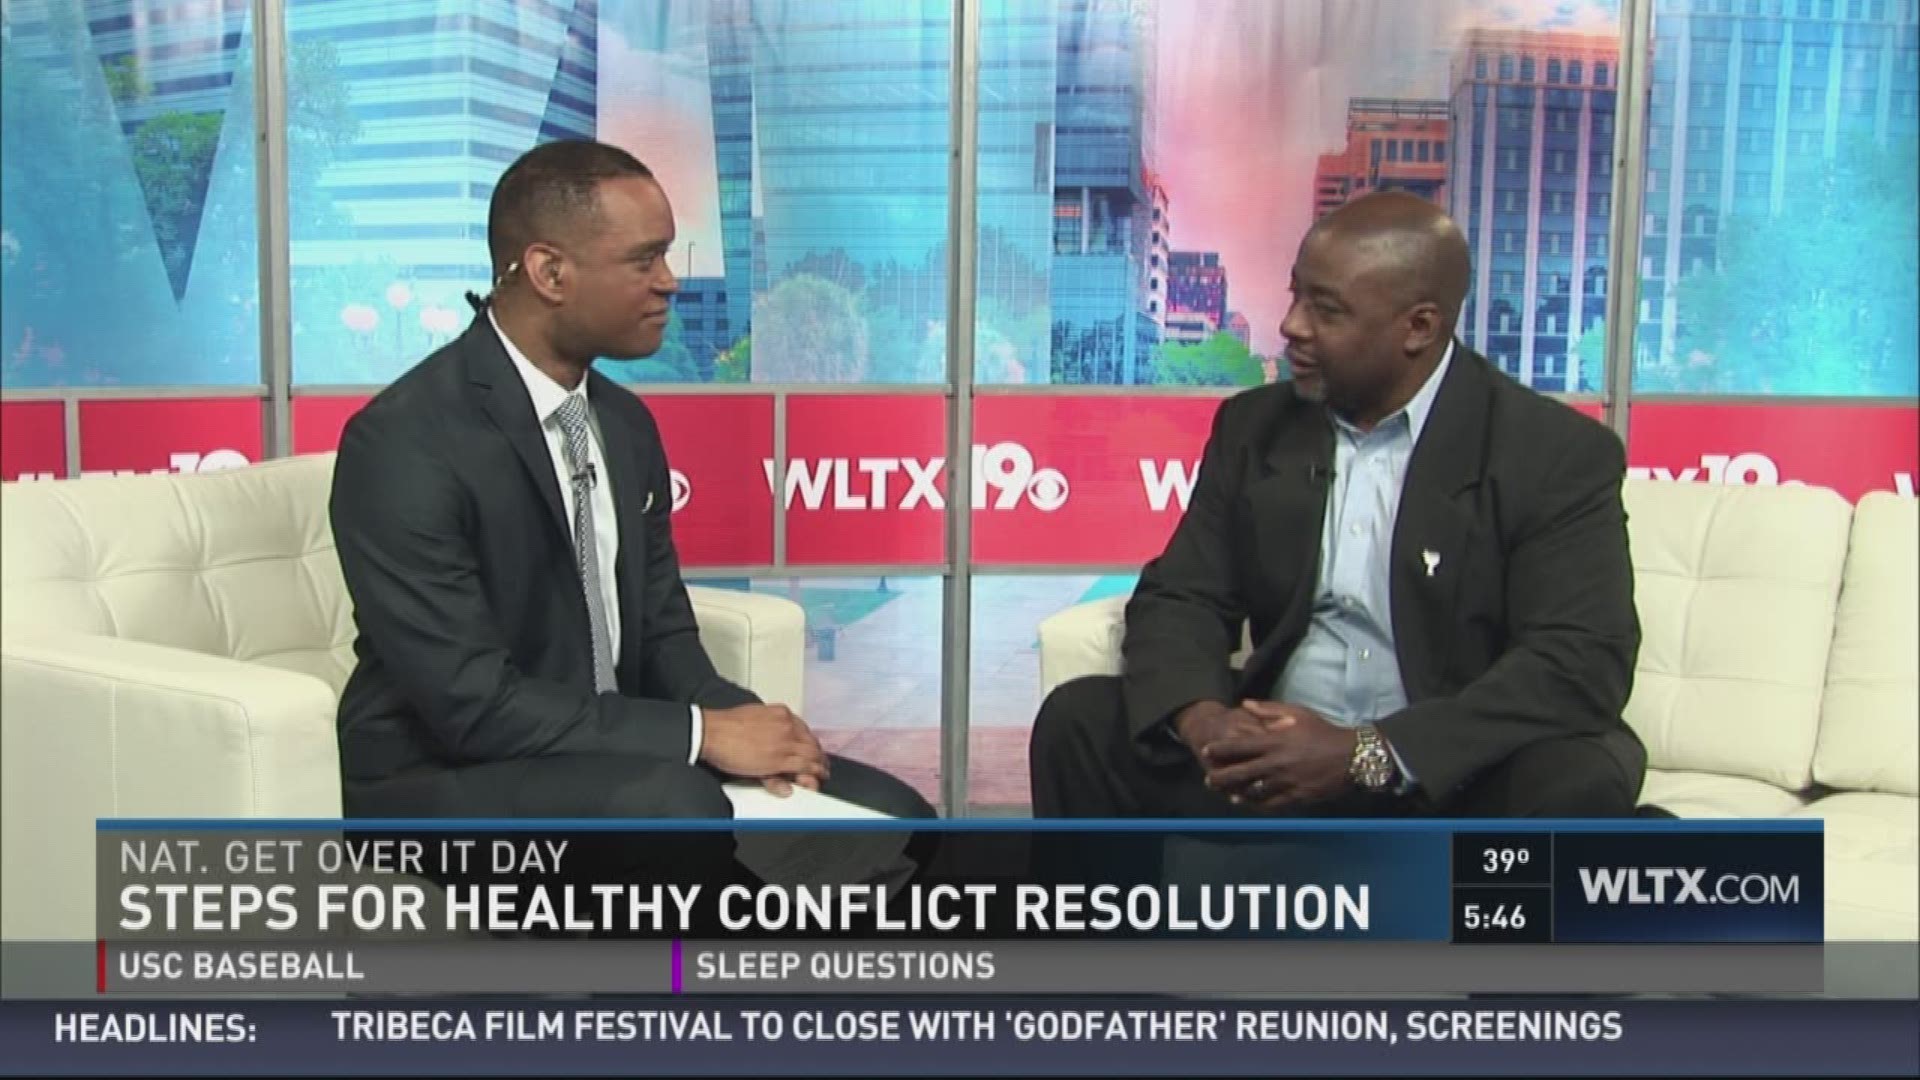 Charles Weathers, of The Weathers Group, joins Deon for "National Get Over It Day" to share tips on healthy conflict resolutions on social media.